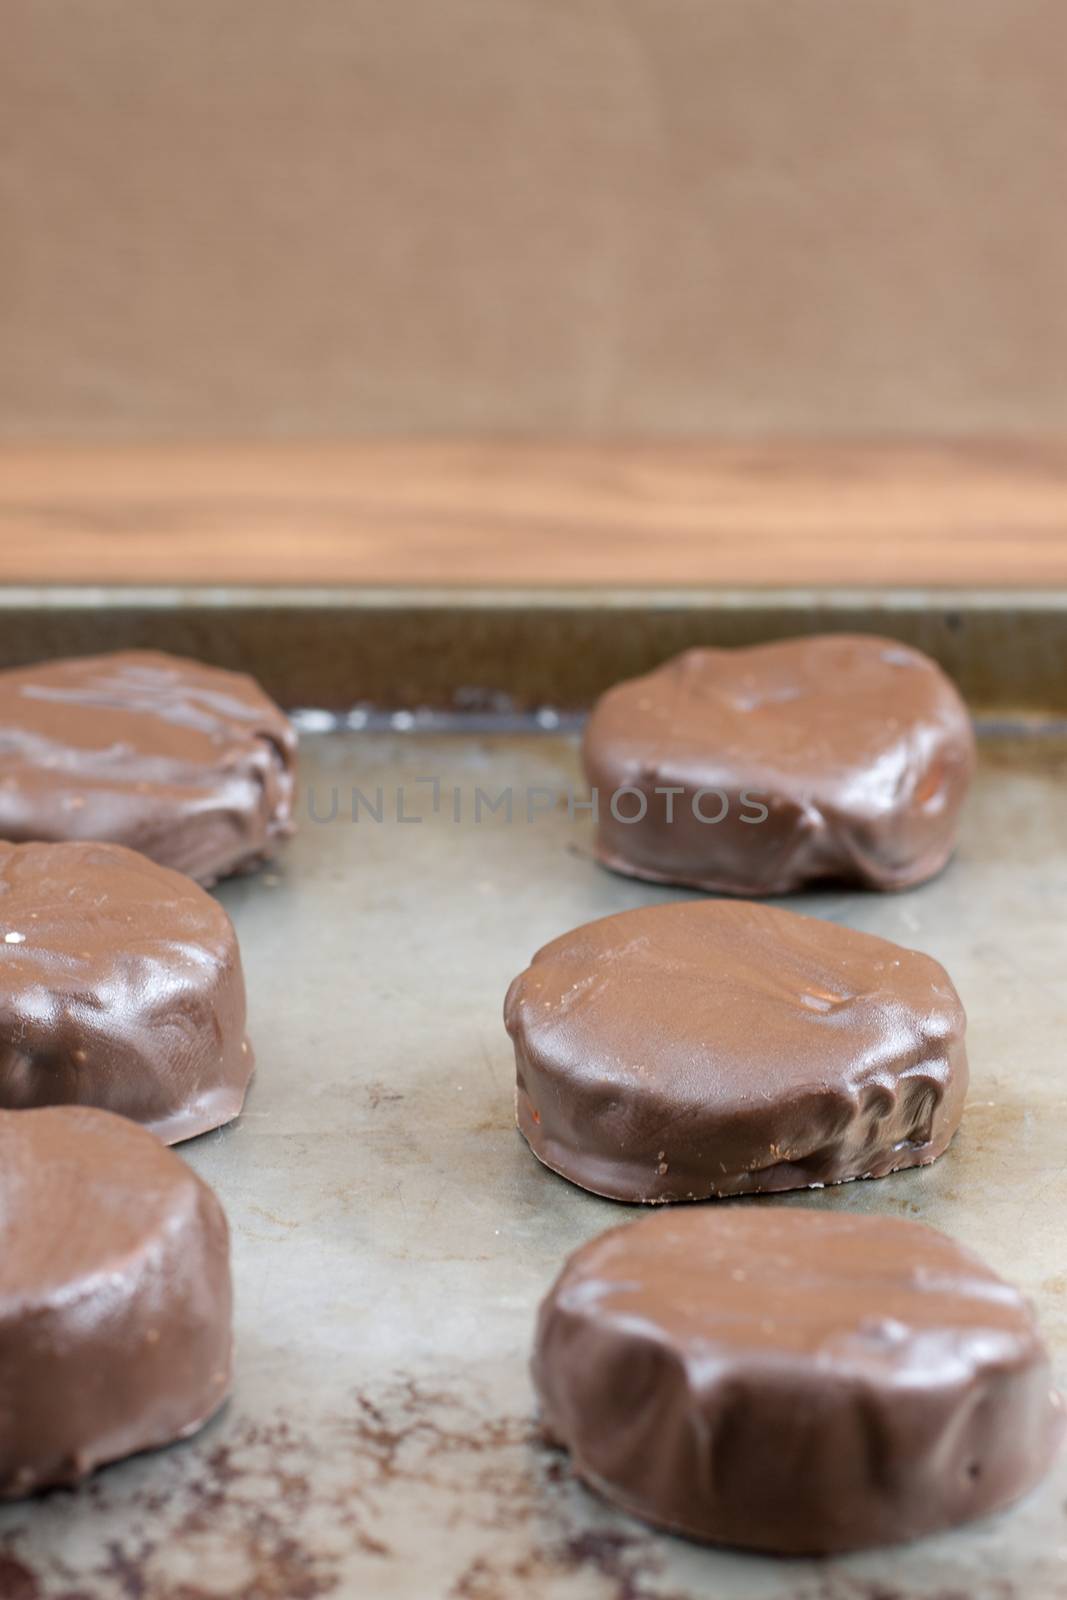 Peppermint patties filled with white, yellow, and orange colored filling.